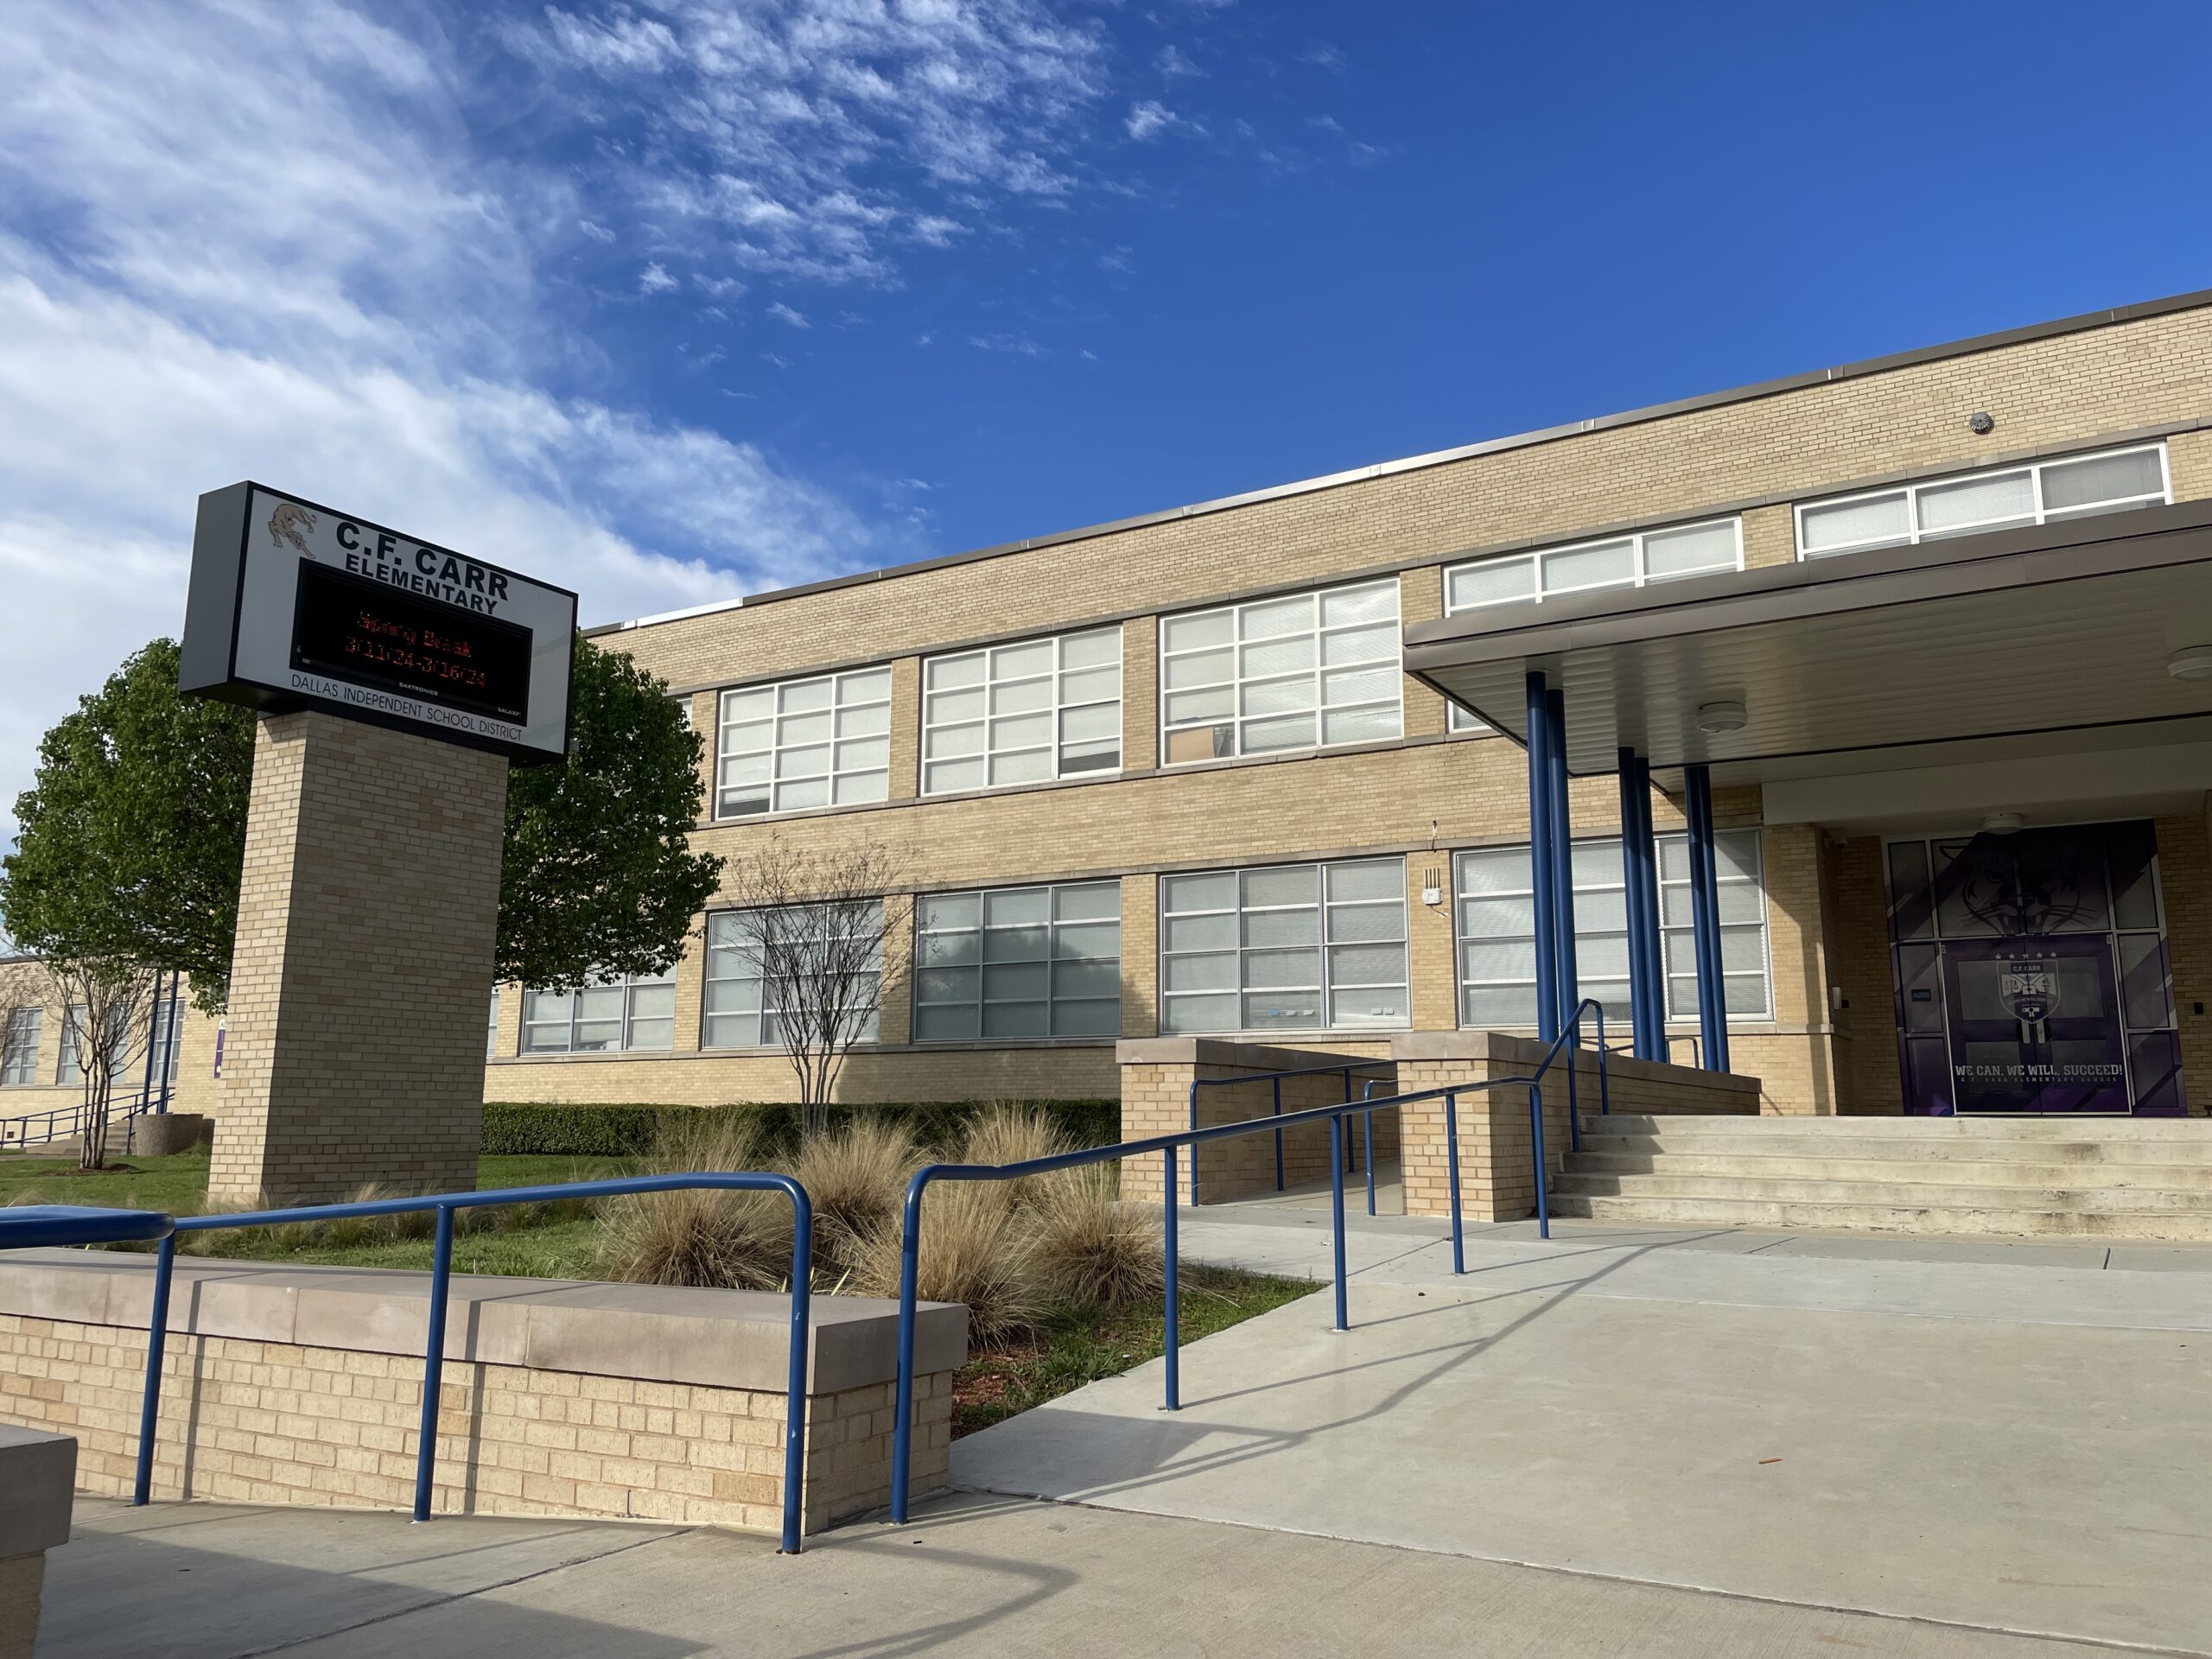 C.F. Carr Elementary received funding through Dallas ISD's 2015 and 2020 bond programs.